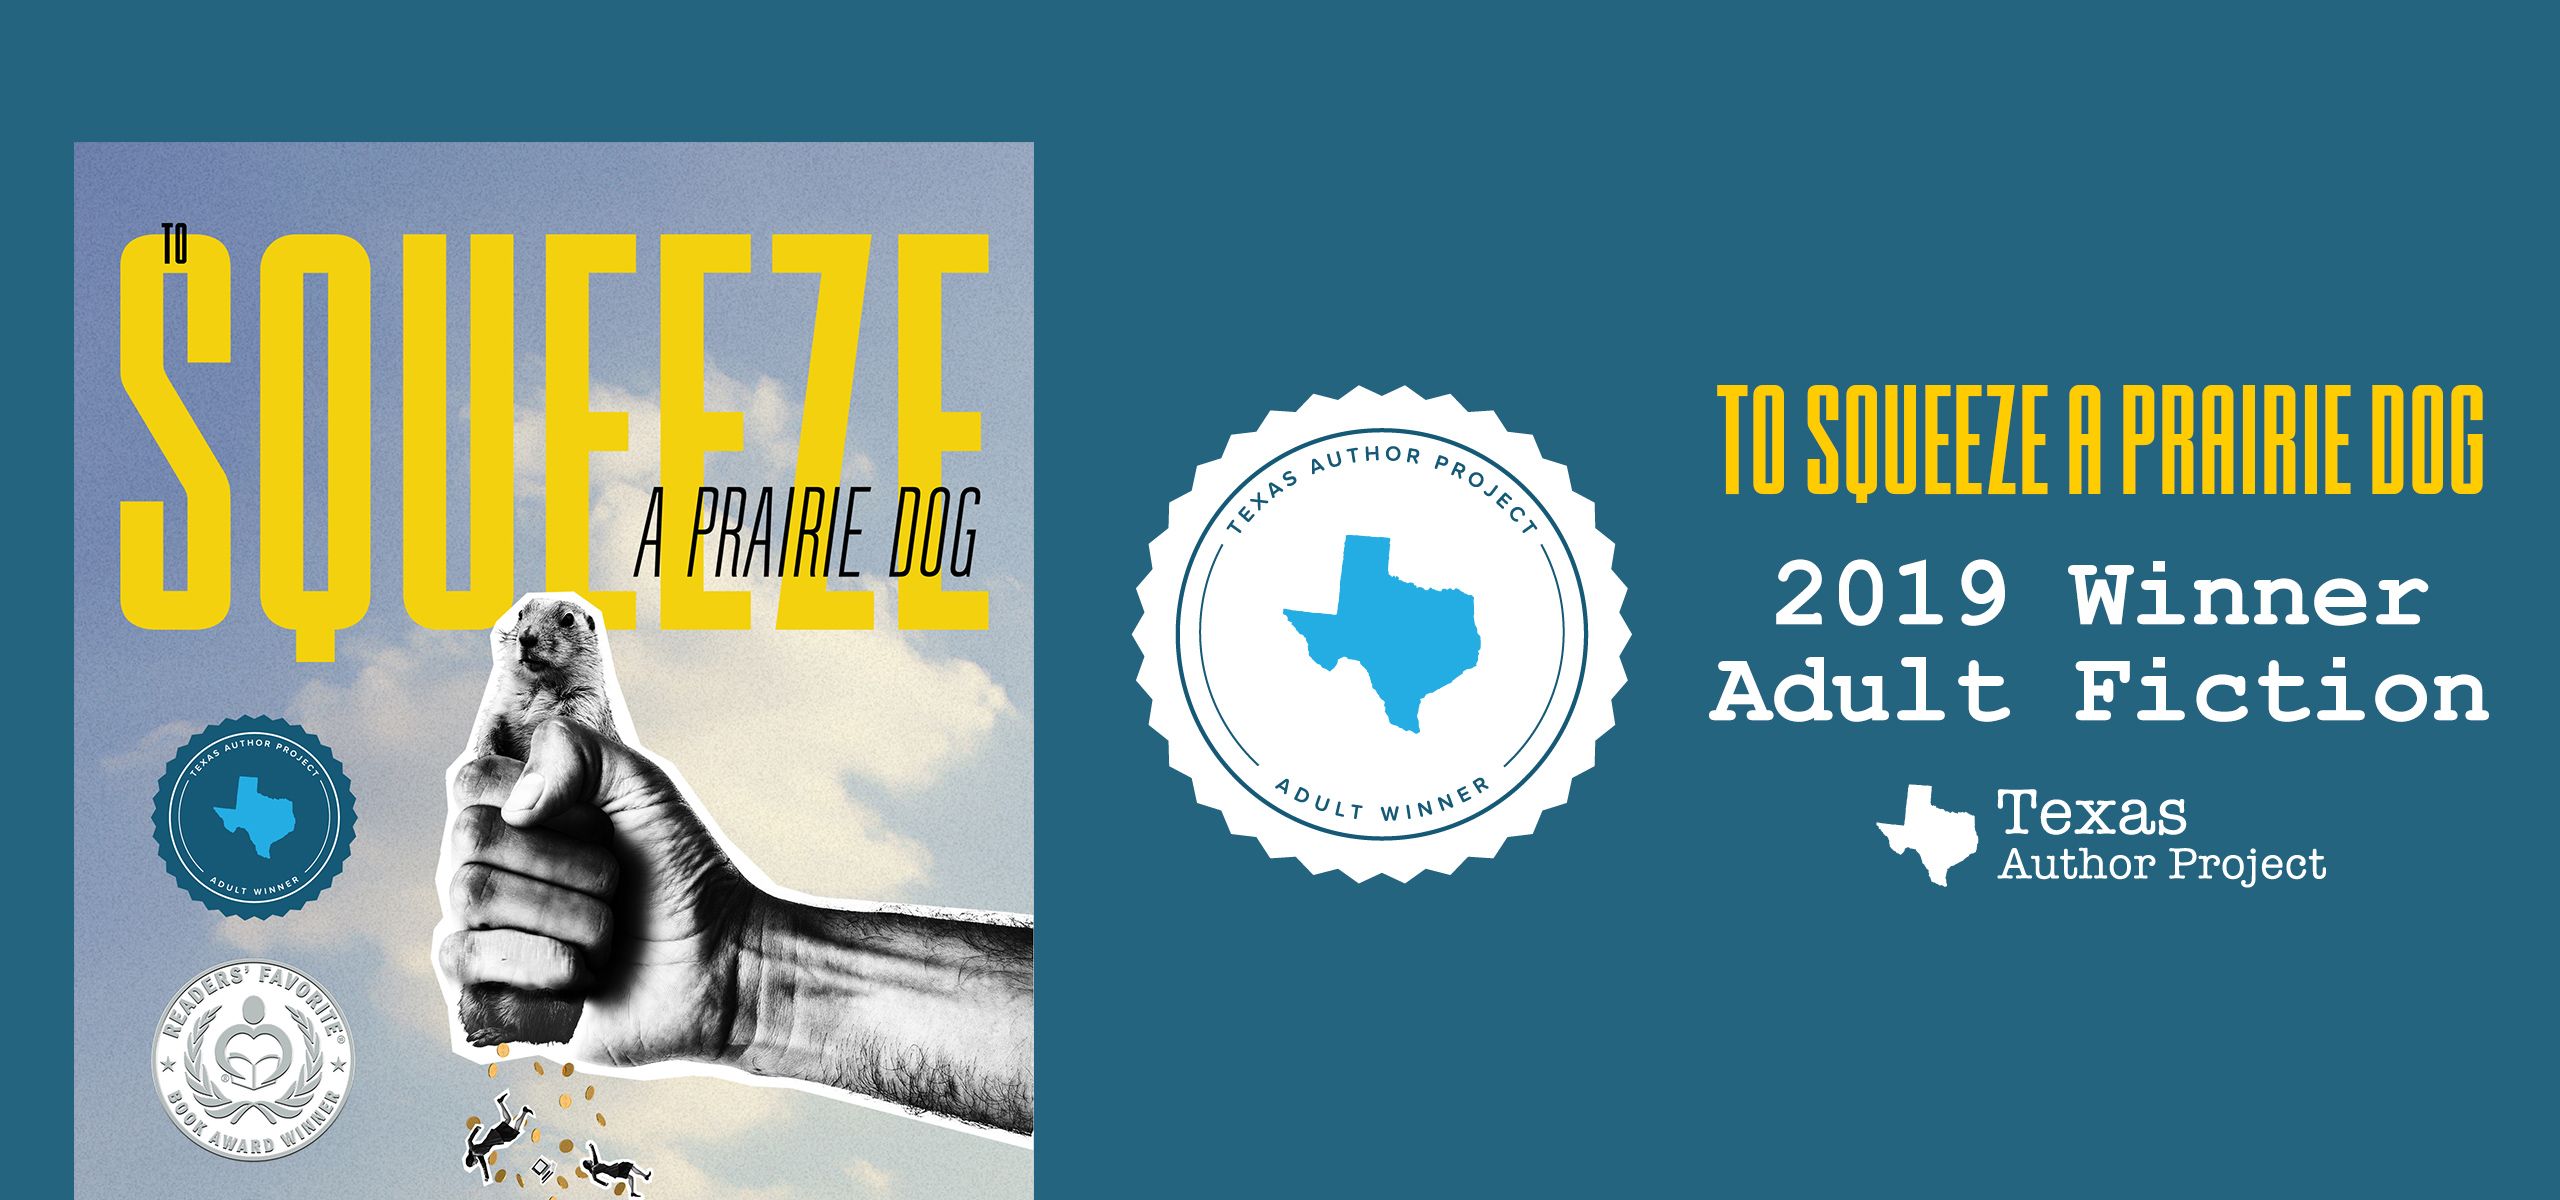 To Squeeze a Prairie Dog - 2019 Texas Author Project Winner for Adult Fiction